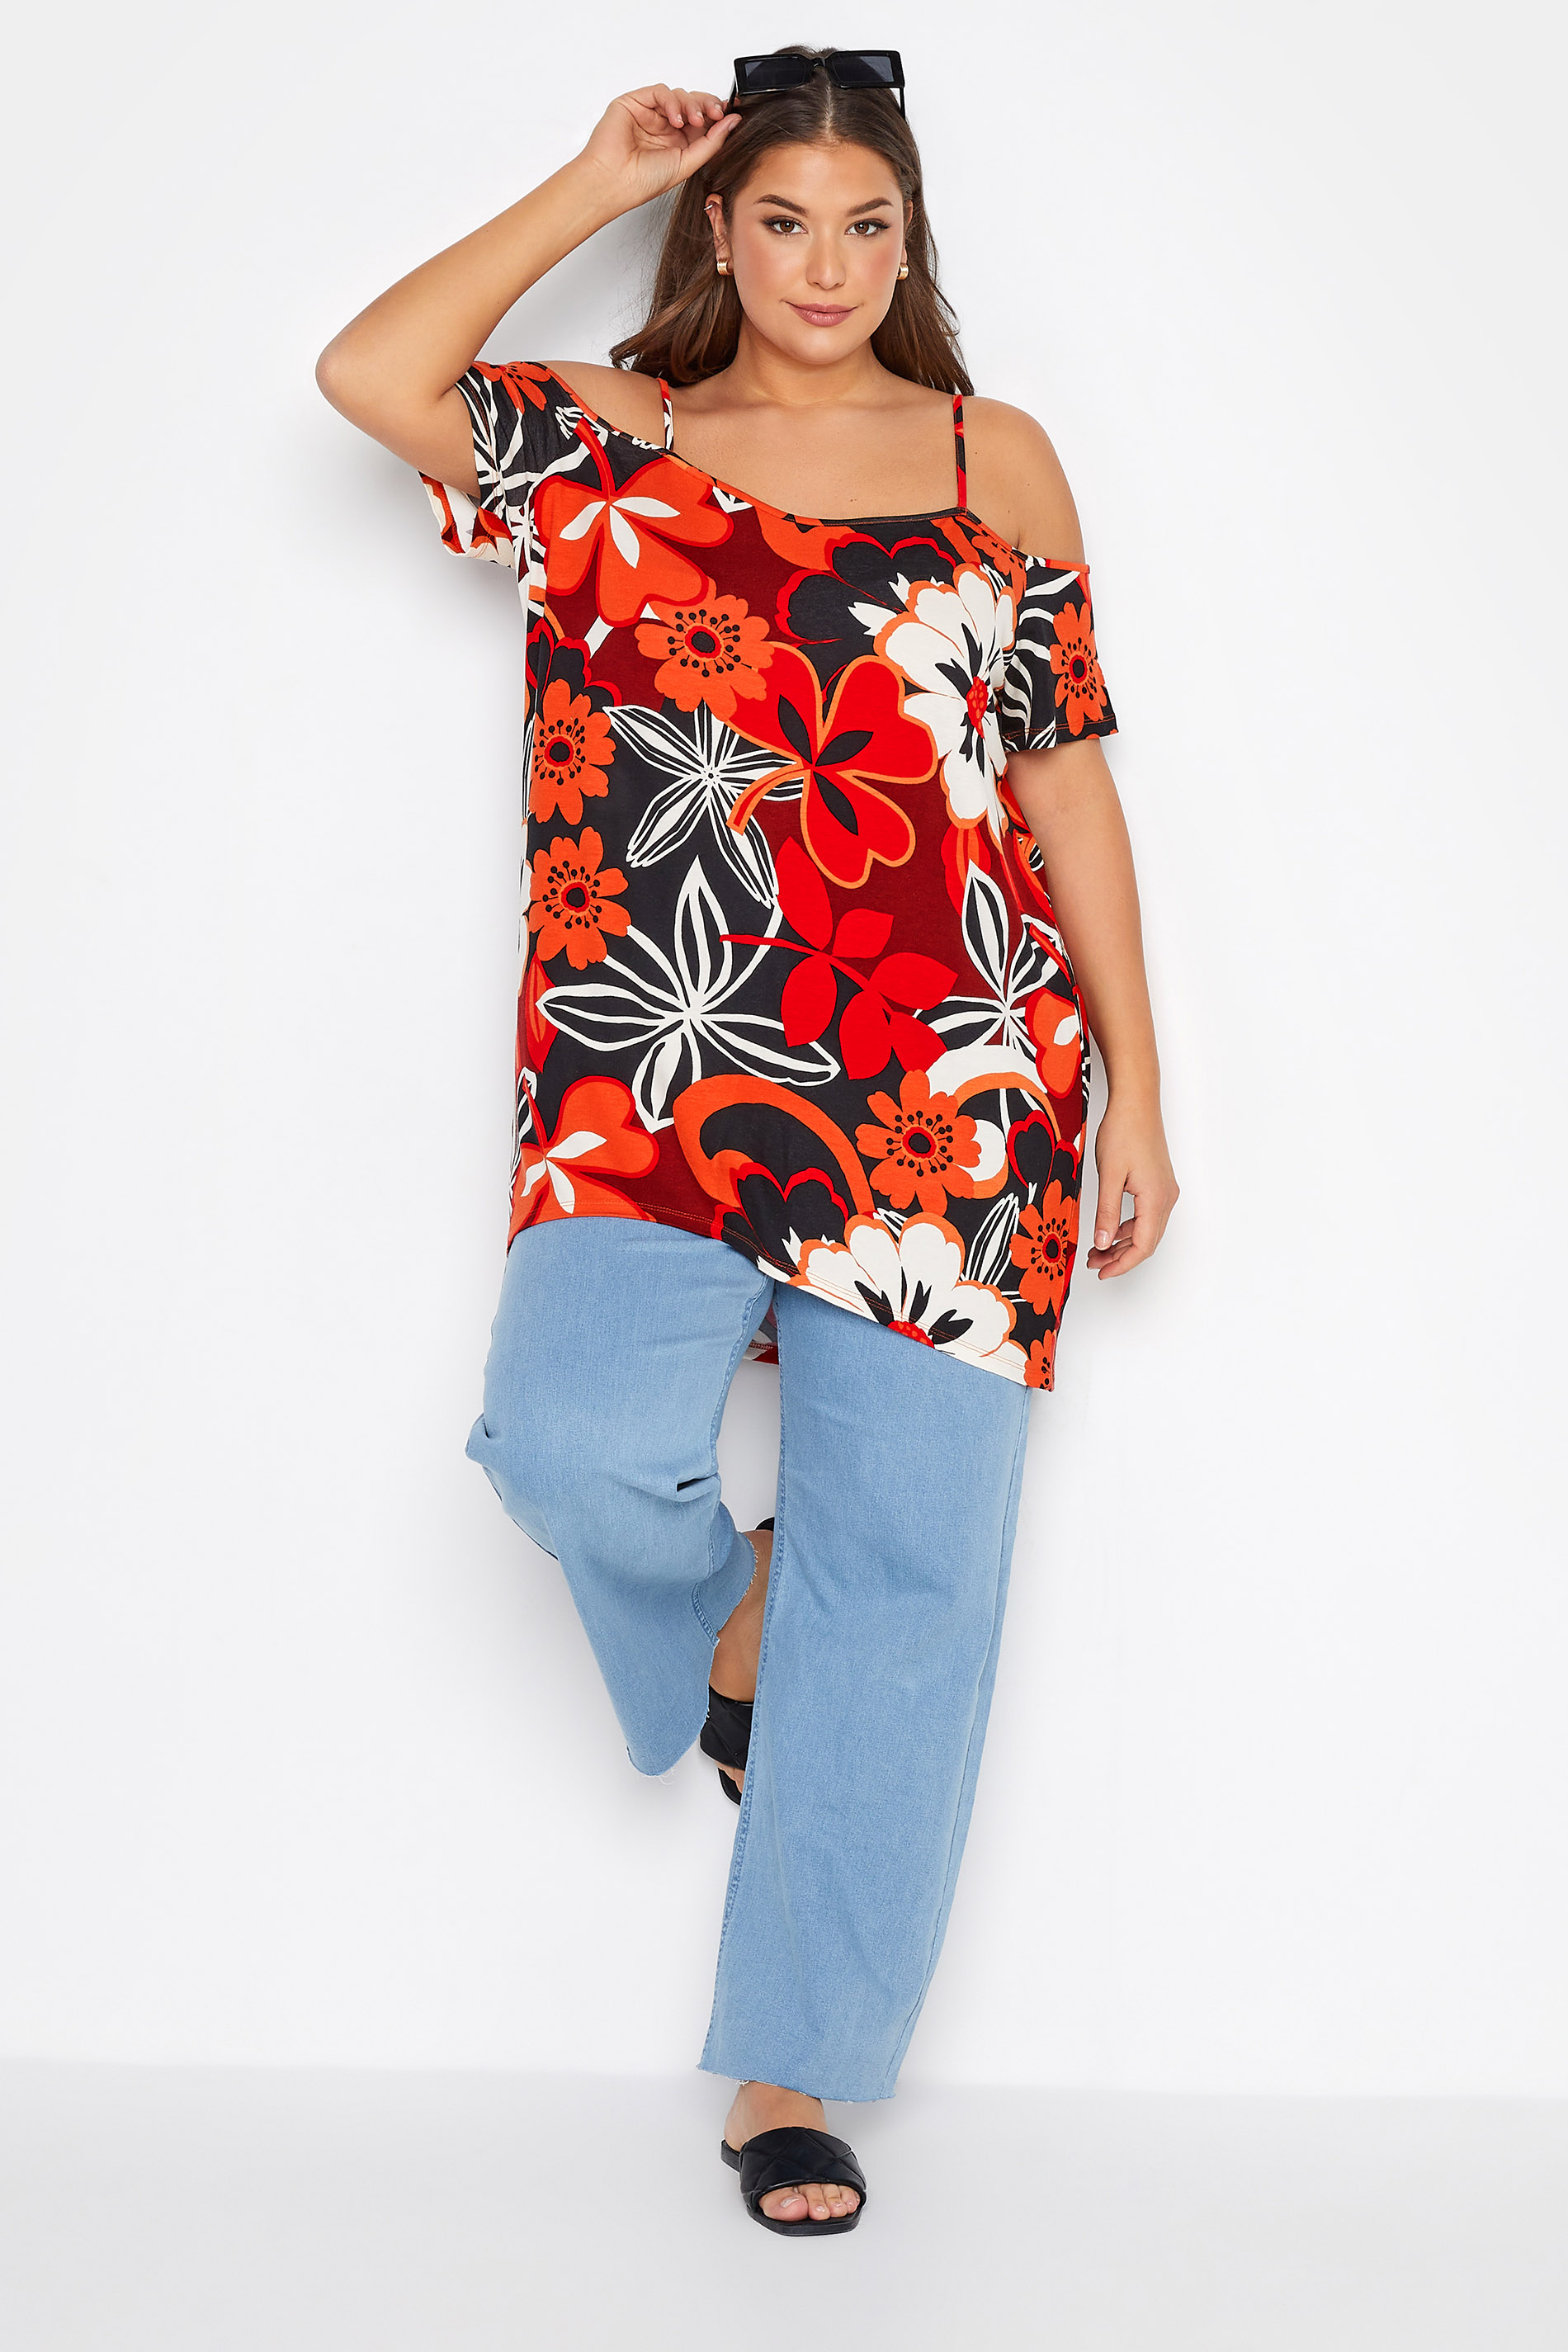 Grande taille  Tops Grande taille  Tops Épaules Ajourées & Style Bardot | Top Rouge Tropical Floral Style Bardot - TL29660